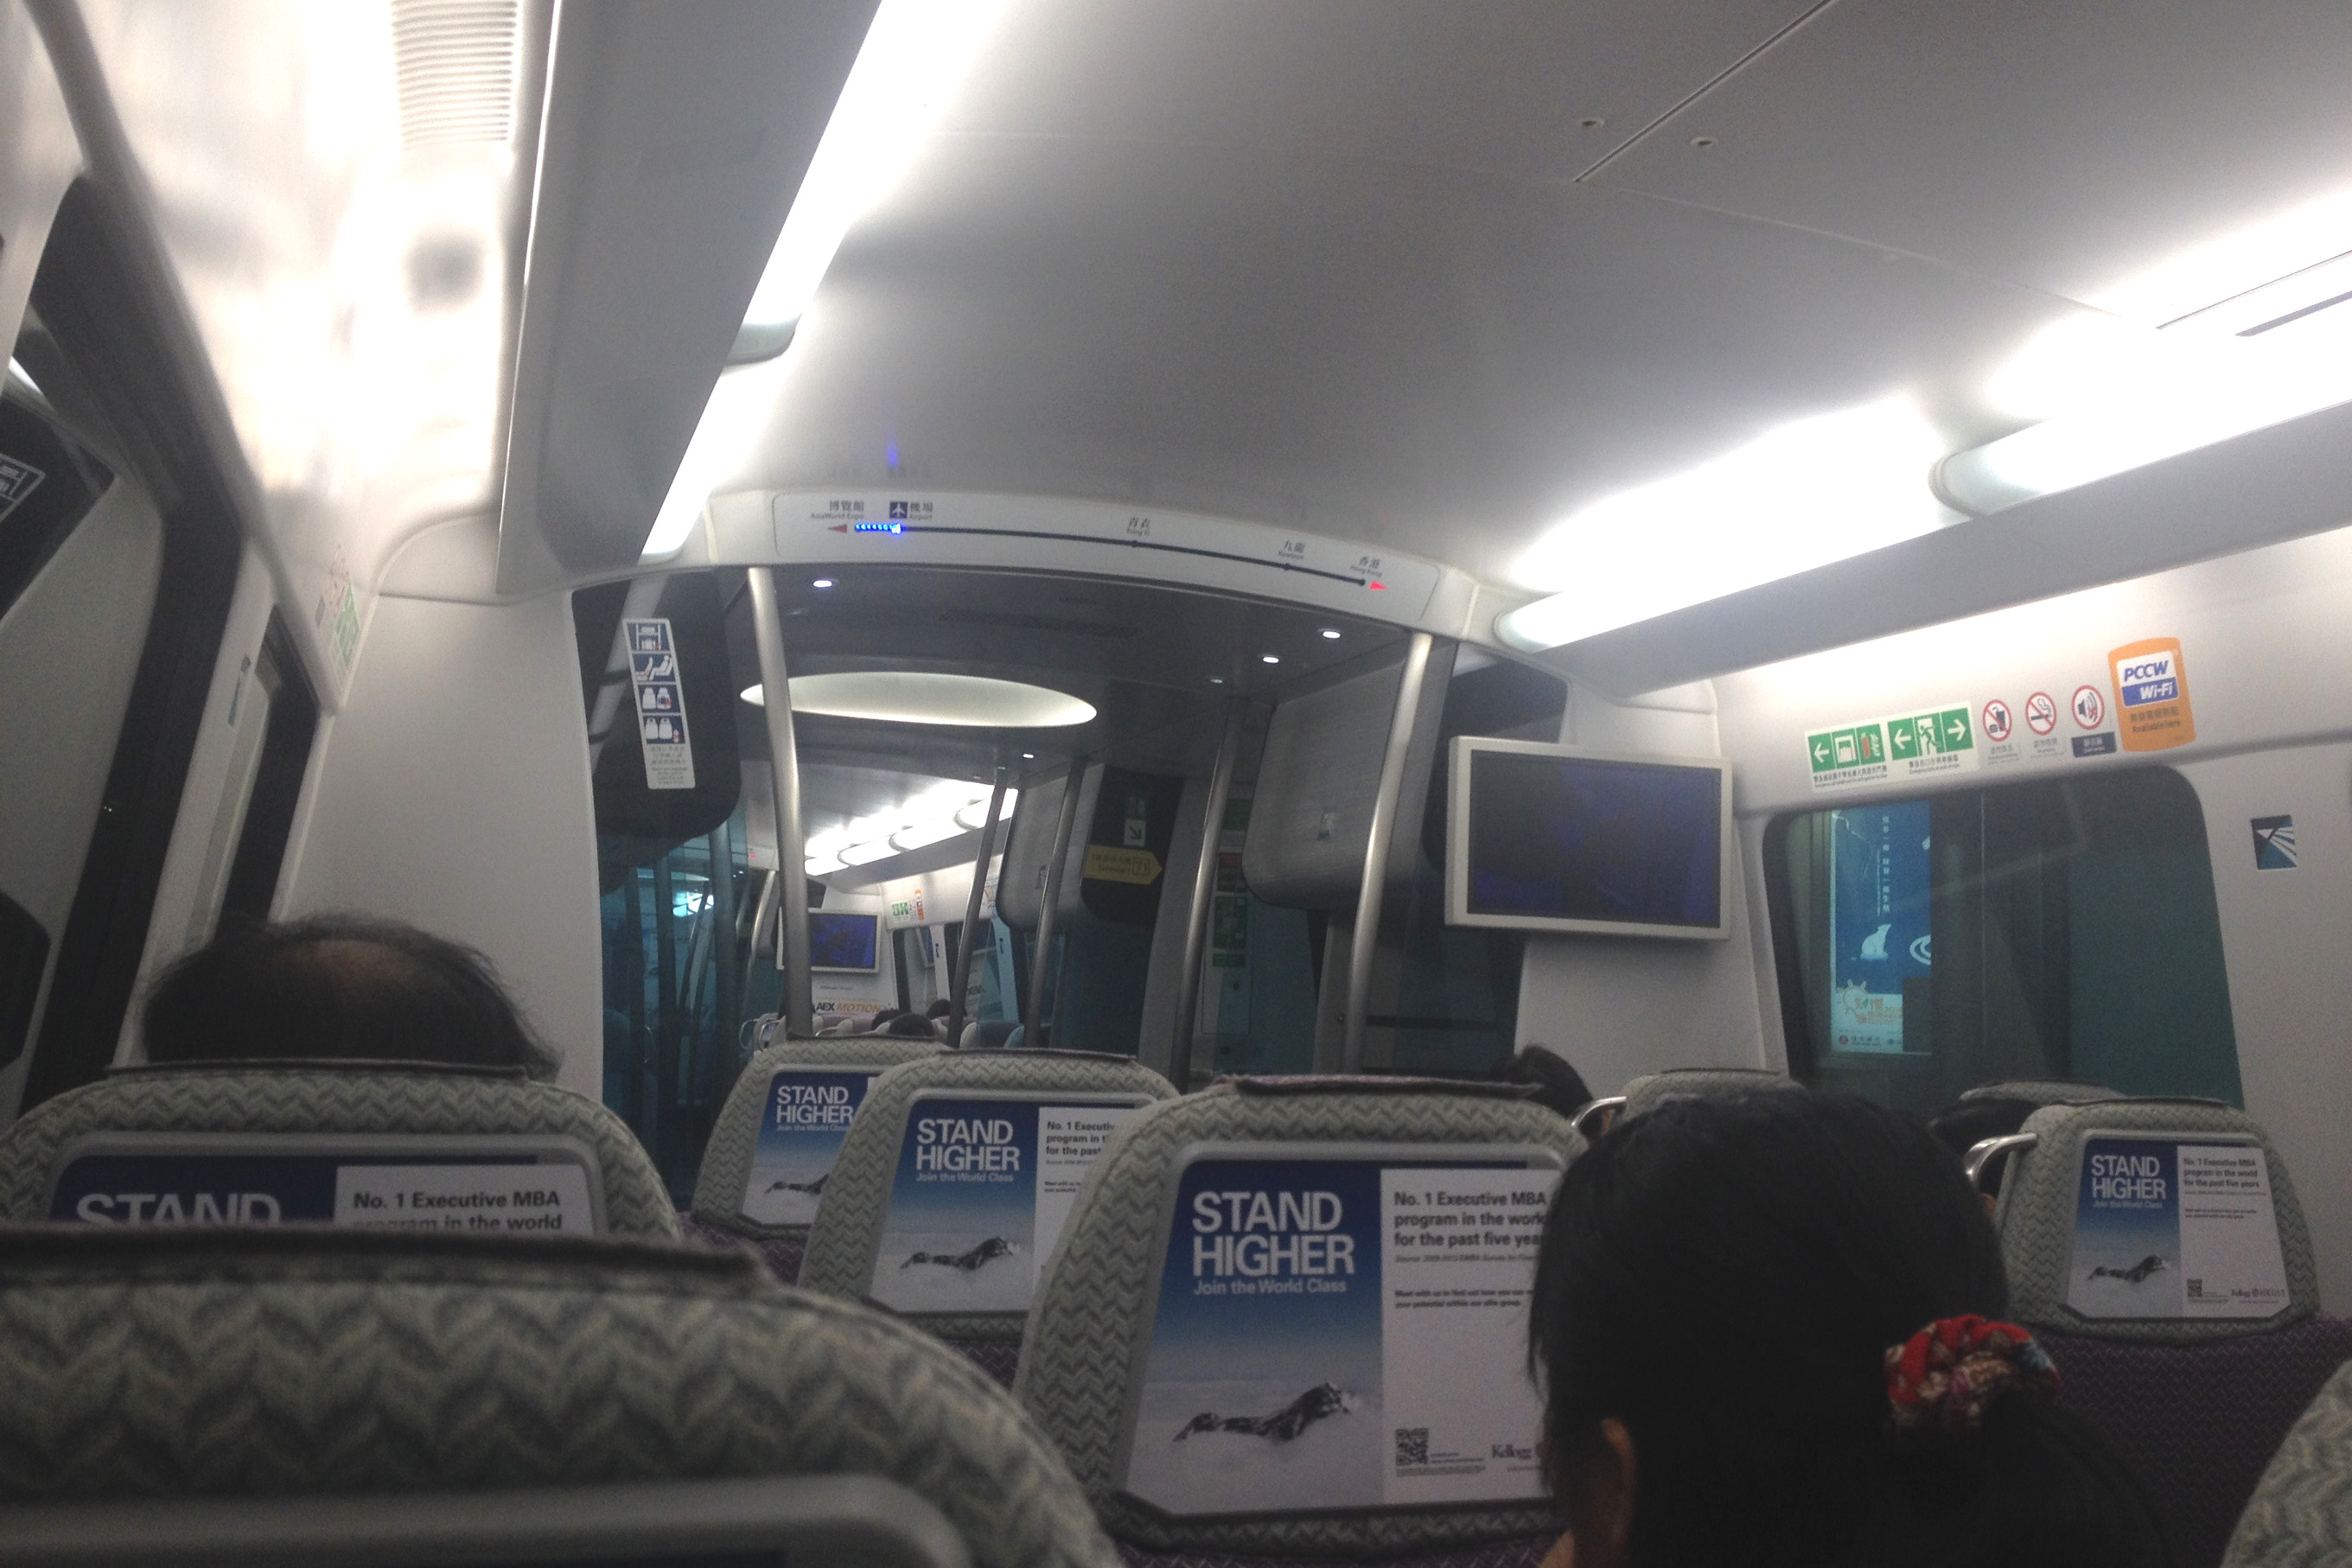 Airport Express Line